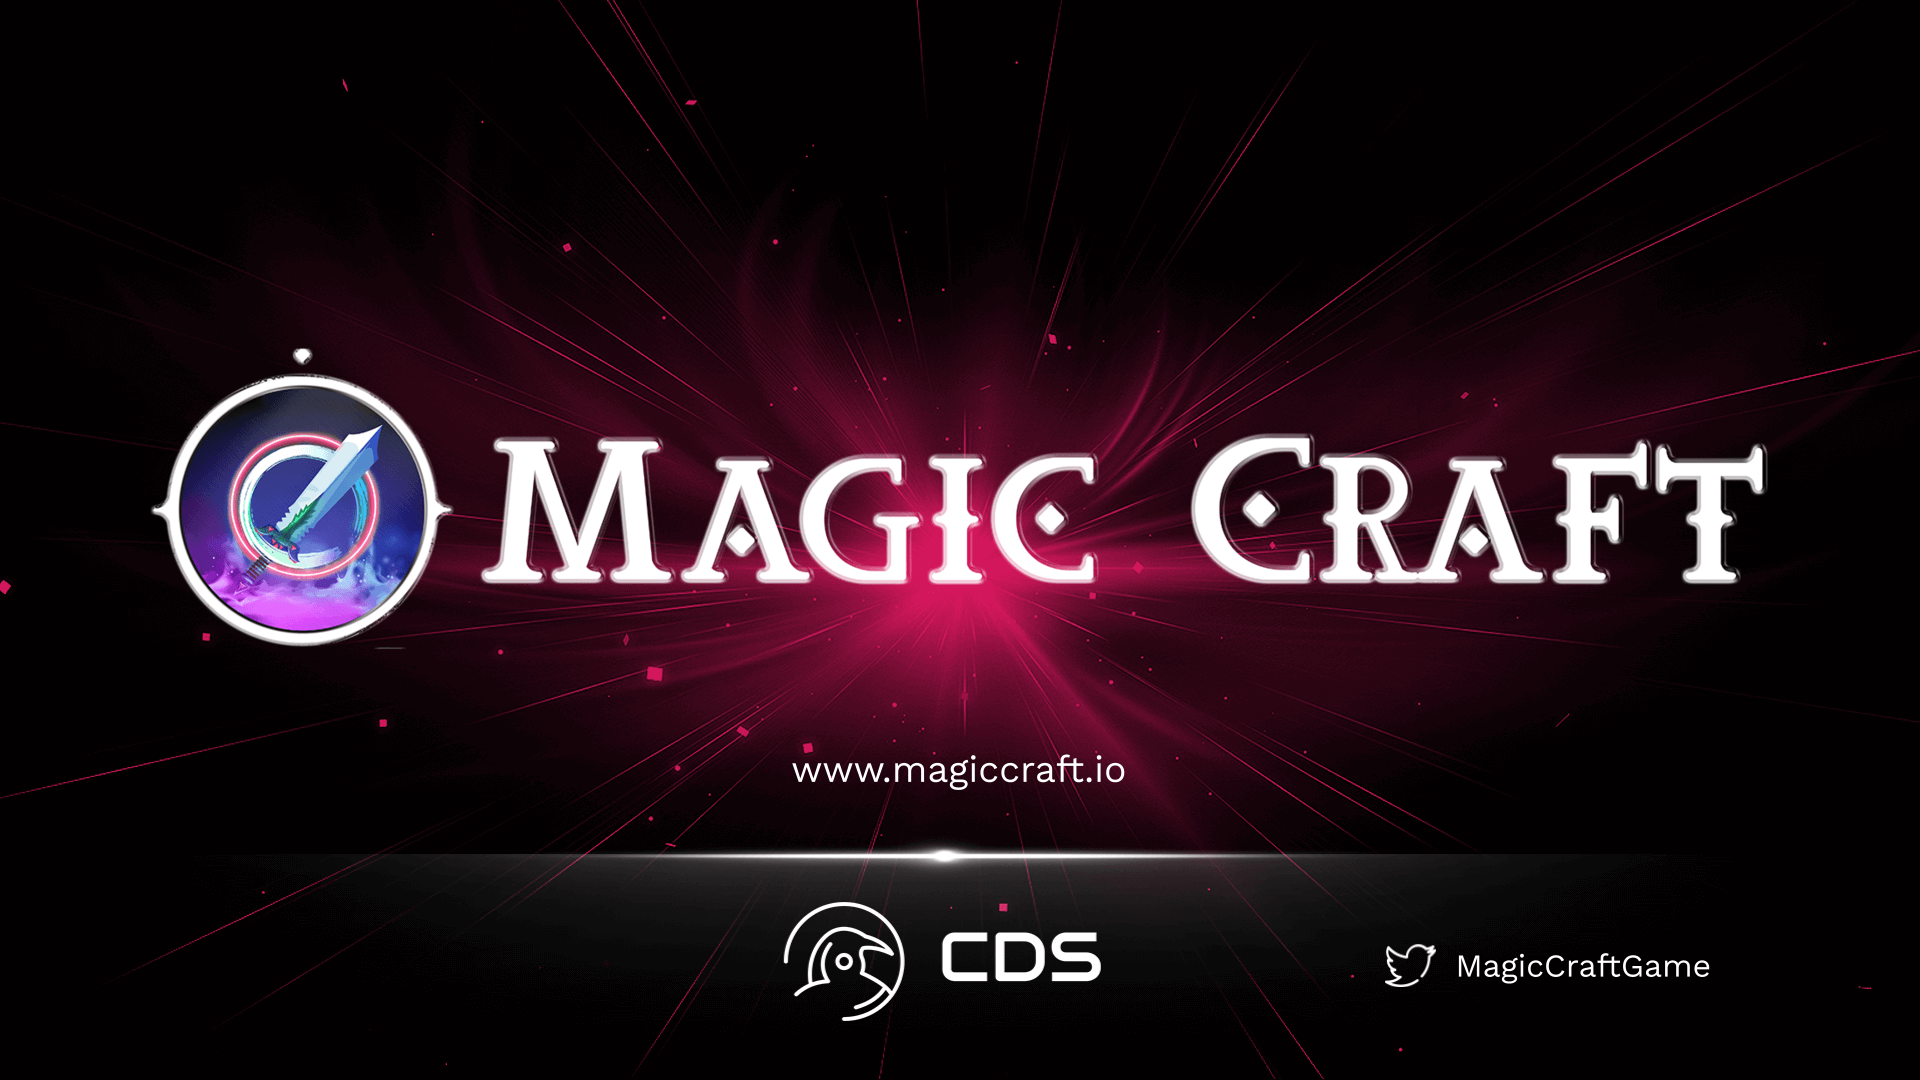 What is Magic Craft